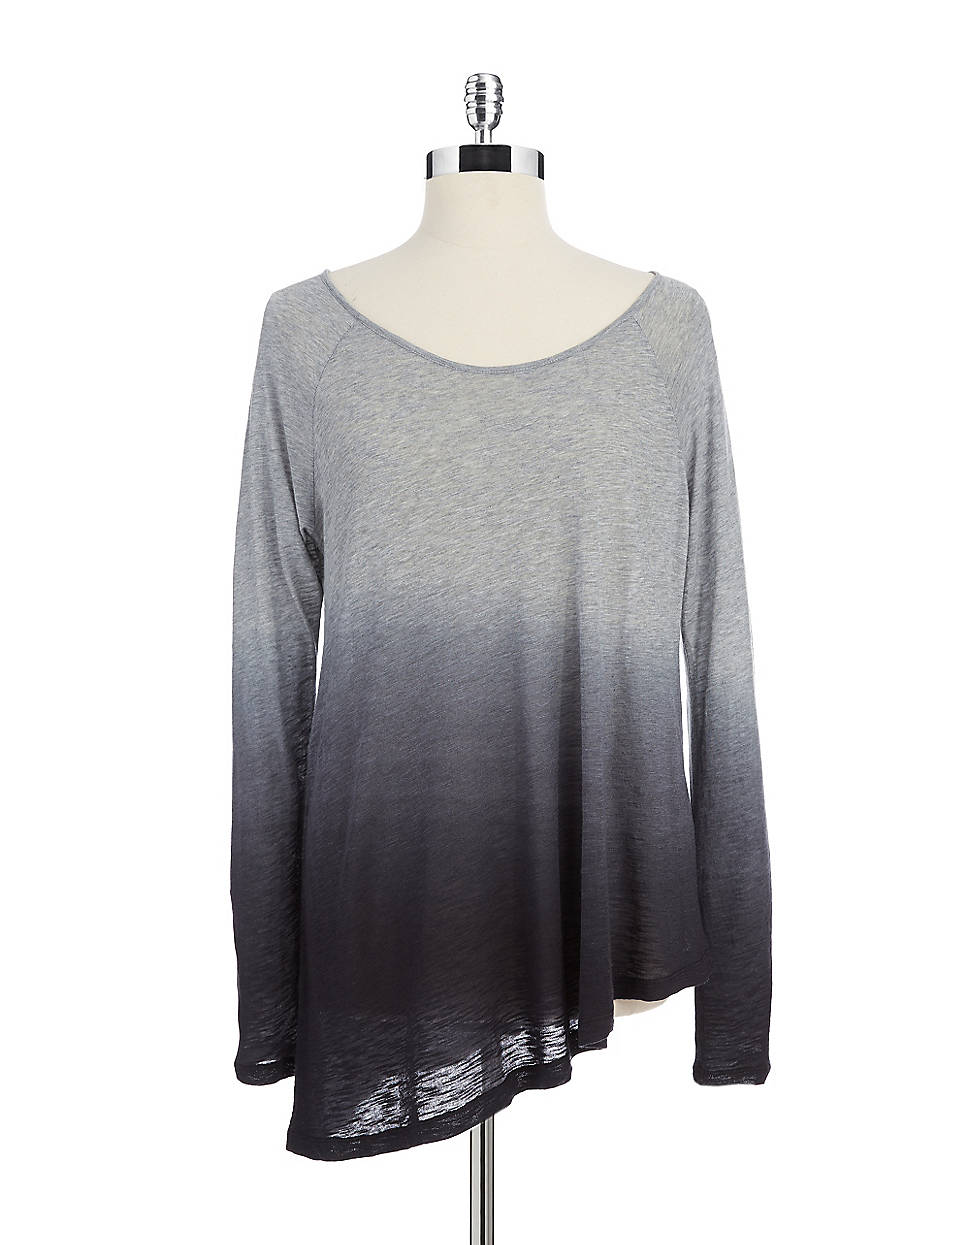 Dkny Ombre Long Sleeve Shirt in Gray (grey) | Lyst